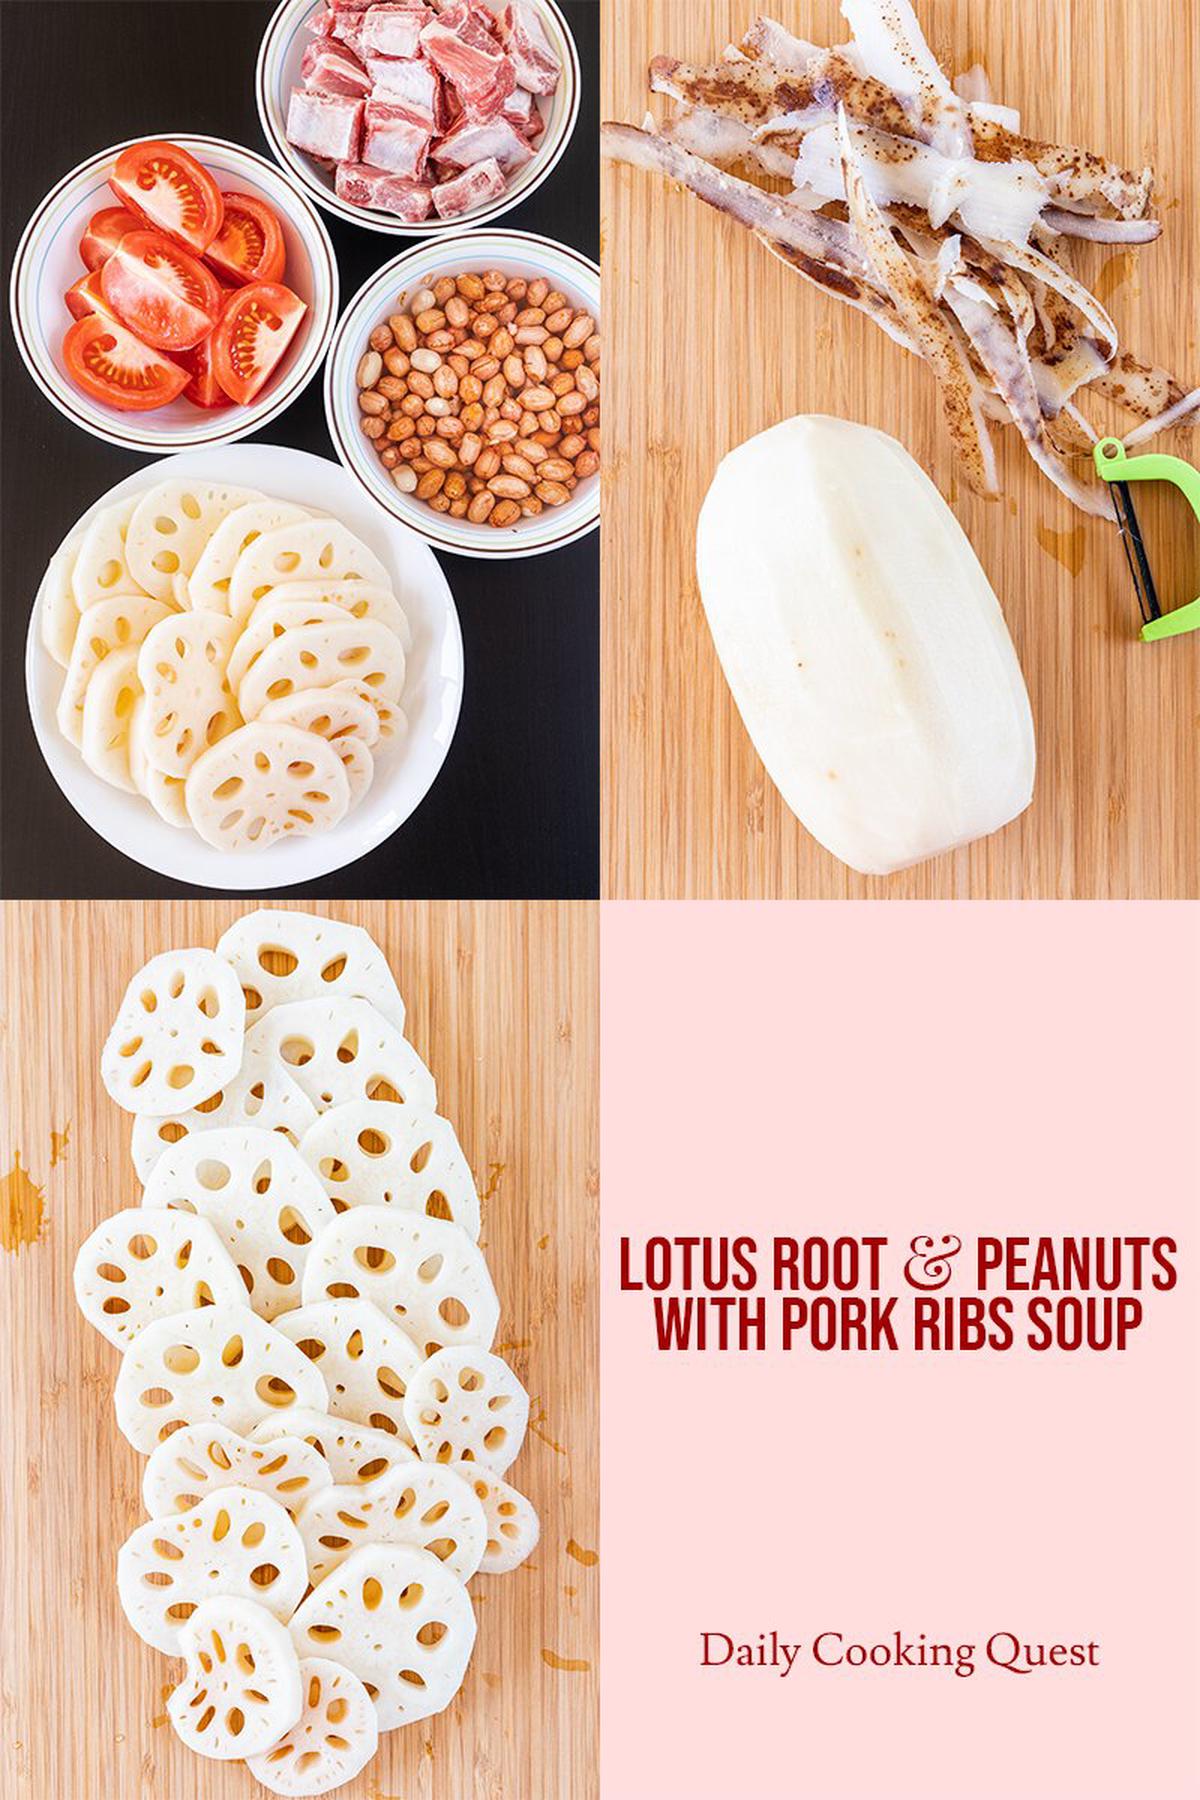 Lotus root, peanuts, pork spare ribs, and tomatoes are the ingredients needed to prepare Chinese lotus root and peanuts with pork ribs soup.